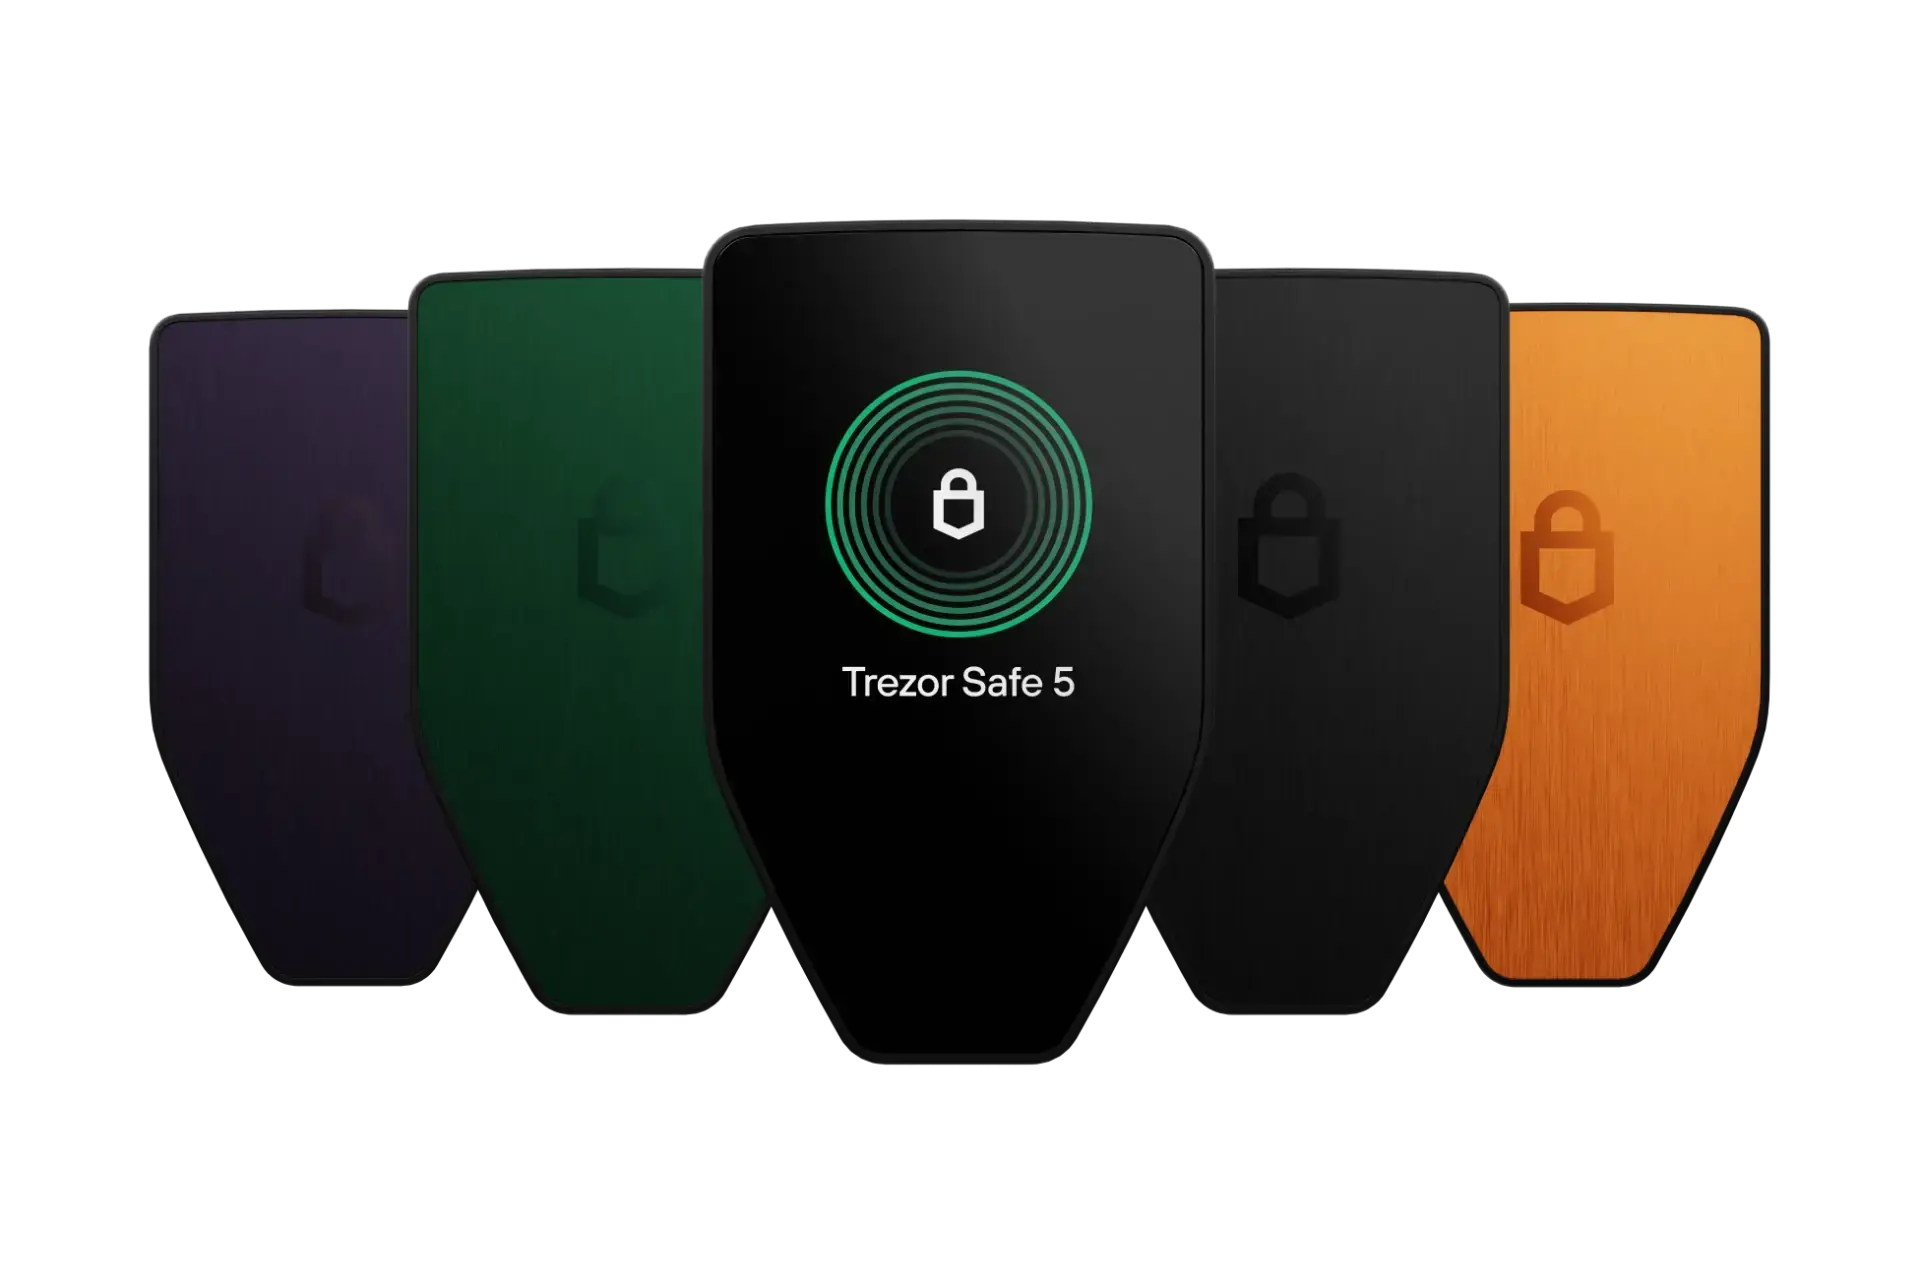 Trezor launches new touchscreen hardware wallet with custom expert setup